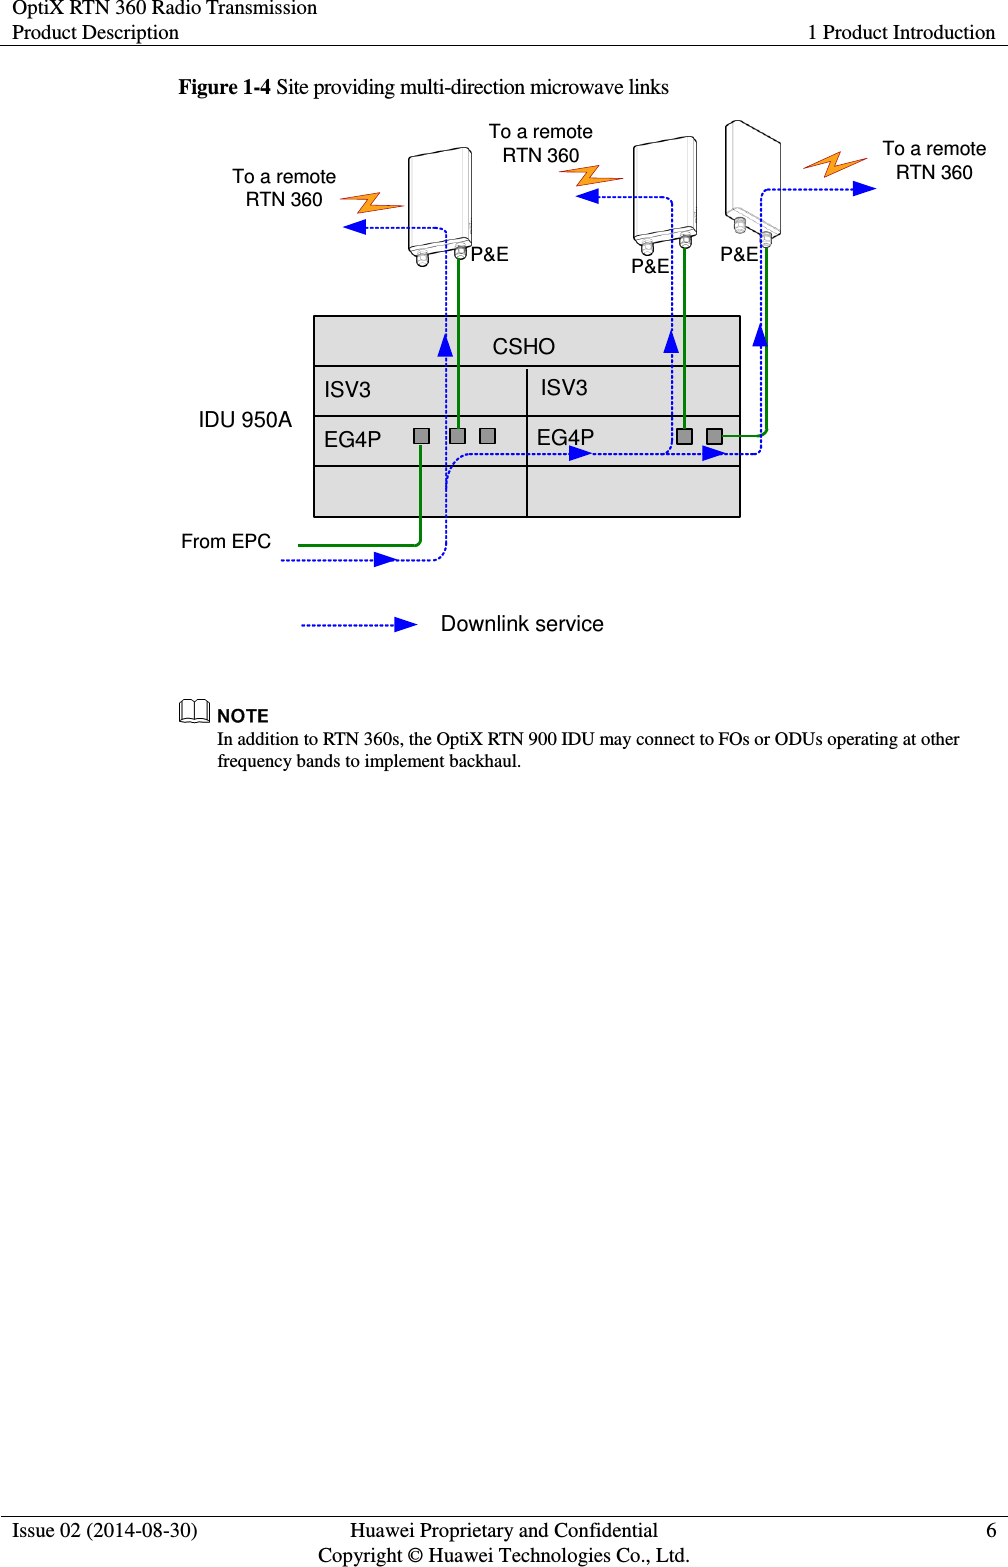 OptiX RTN 360 Radio Transmission Product Description 1 Product Introduction  Issue 02 (2014-08-30) Huawei Proprietary and Confidential                                     Copyright © Huawei Technologies Co., Ltd. 6  Figure 1-4 Site providing multi-direction microwave links EG4PISV3ISV3EG4PP&amp;E P&amp;EIDU 950ATo a remote RTN 360 To a remote RTN 360To a remote RTN 360From EPCP&amp;ECSHODownlink service   In addition to RTN 360s, the OptiX RTN 900 IDU may connect to FOs or ODUs operating at other frequency bands to implement backhaul. 